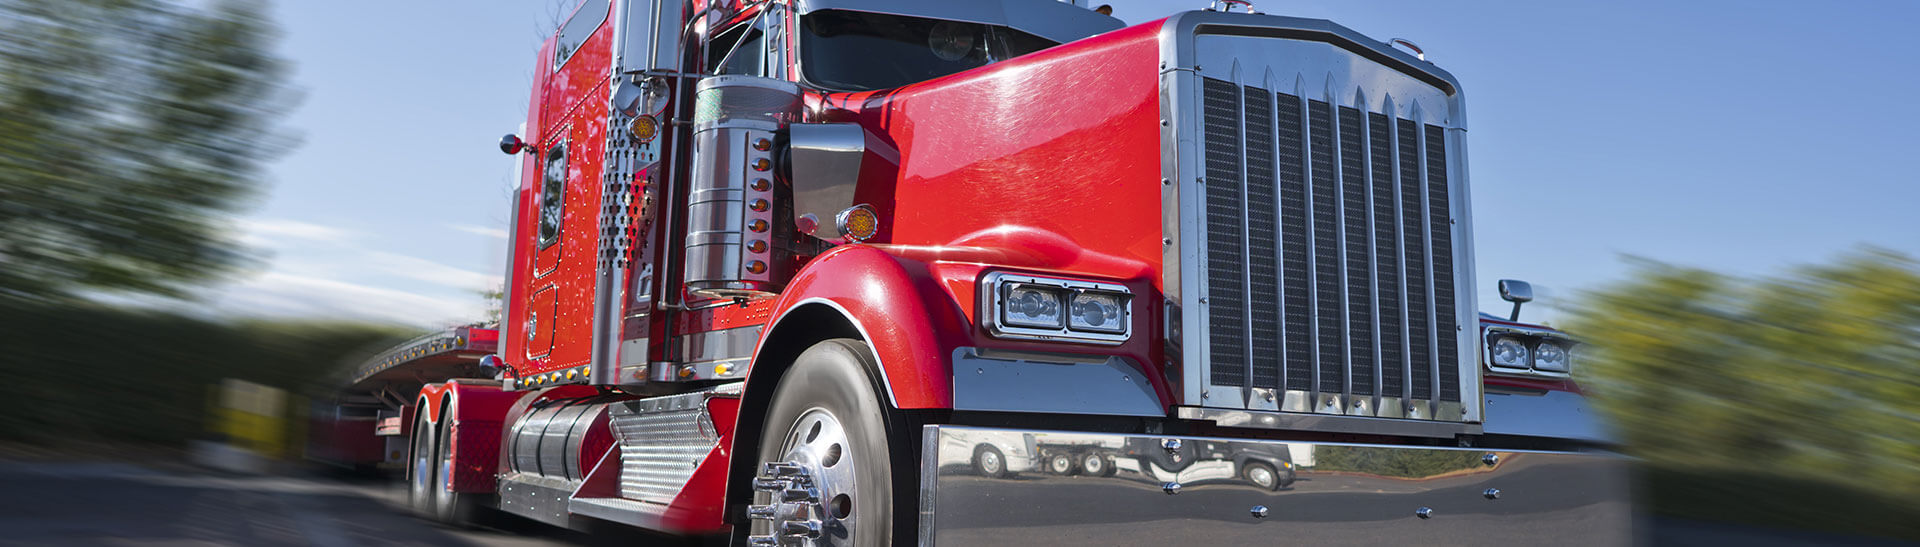 Napa Trucking Company, Trucking Services and Long Haul Trucking